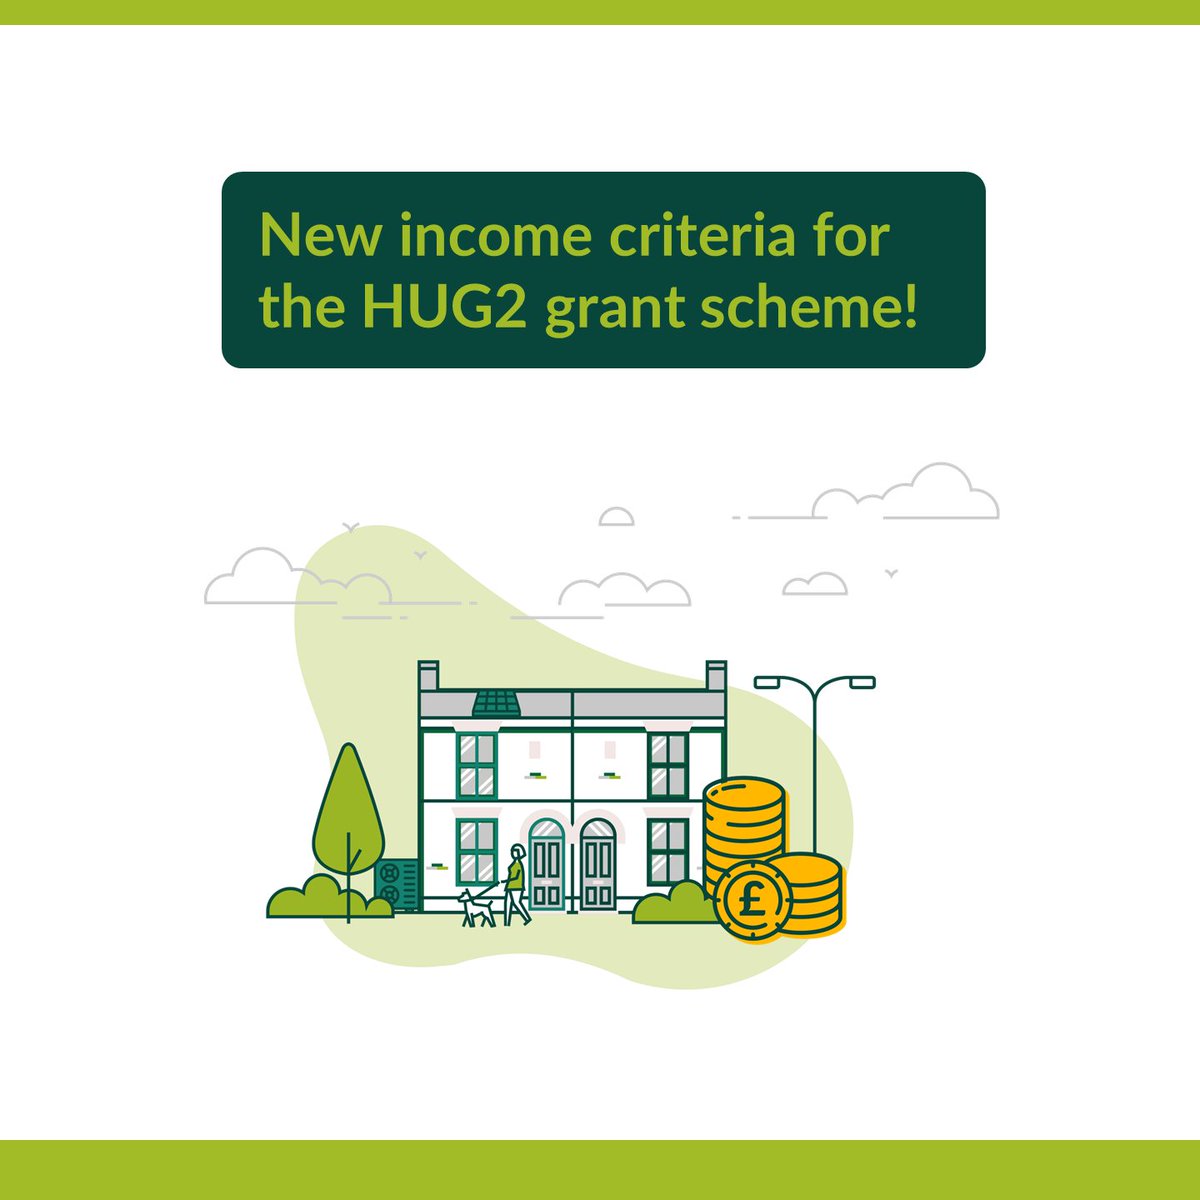 Good news! There has been a change to the Home Upgrade Grant, and more people may now be eligible under income requirements. To see if you may be eligible, see the new income criteria bit.ly/AoEHUG2 To send us an application, fill out this form bit.ly/AoEGFRF